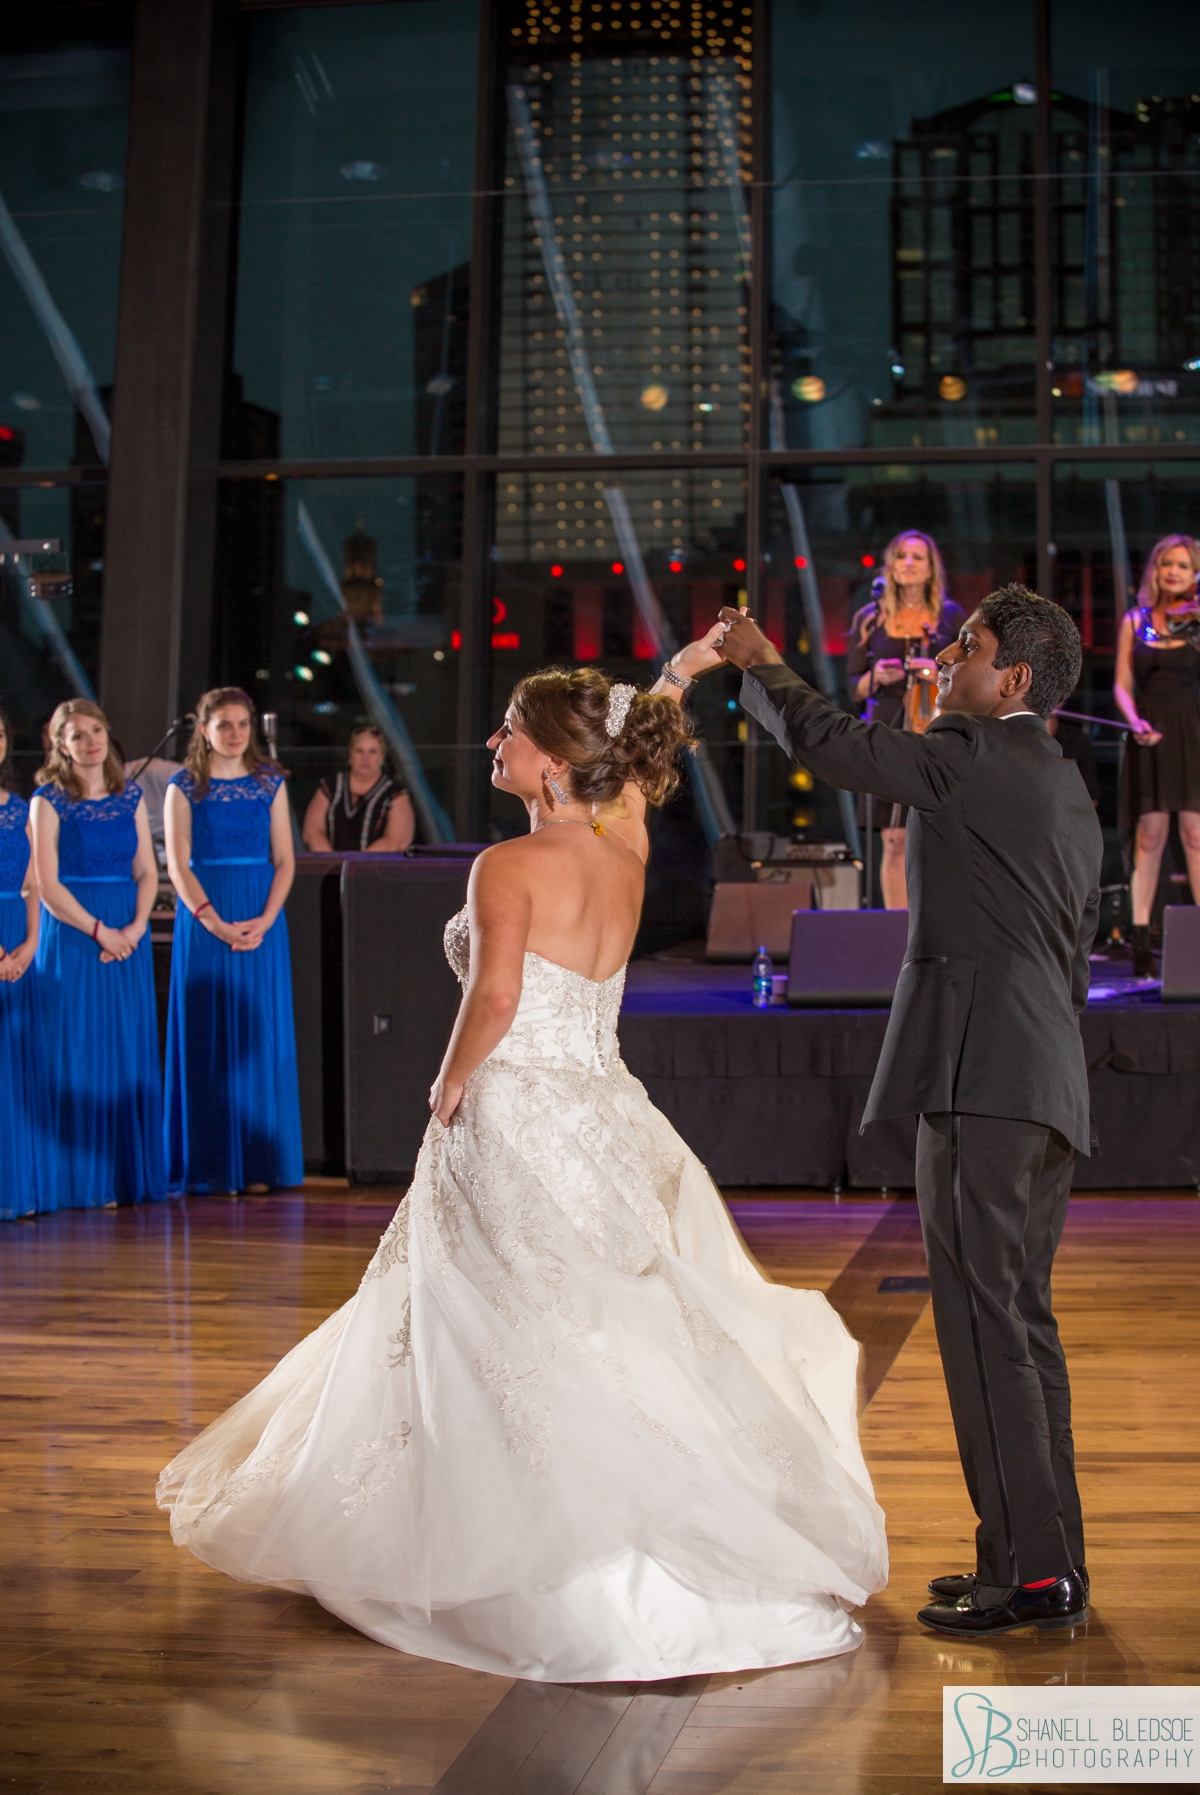 choreographed dance at Country Music Hall of Fame wedding reception 